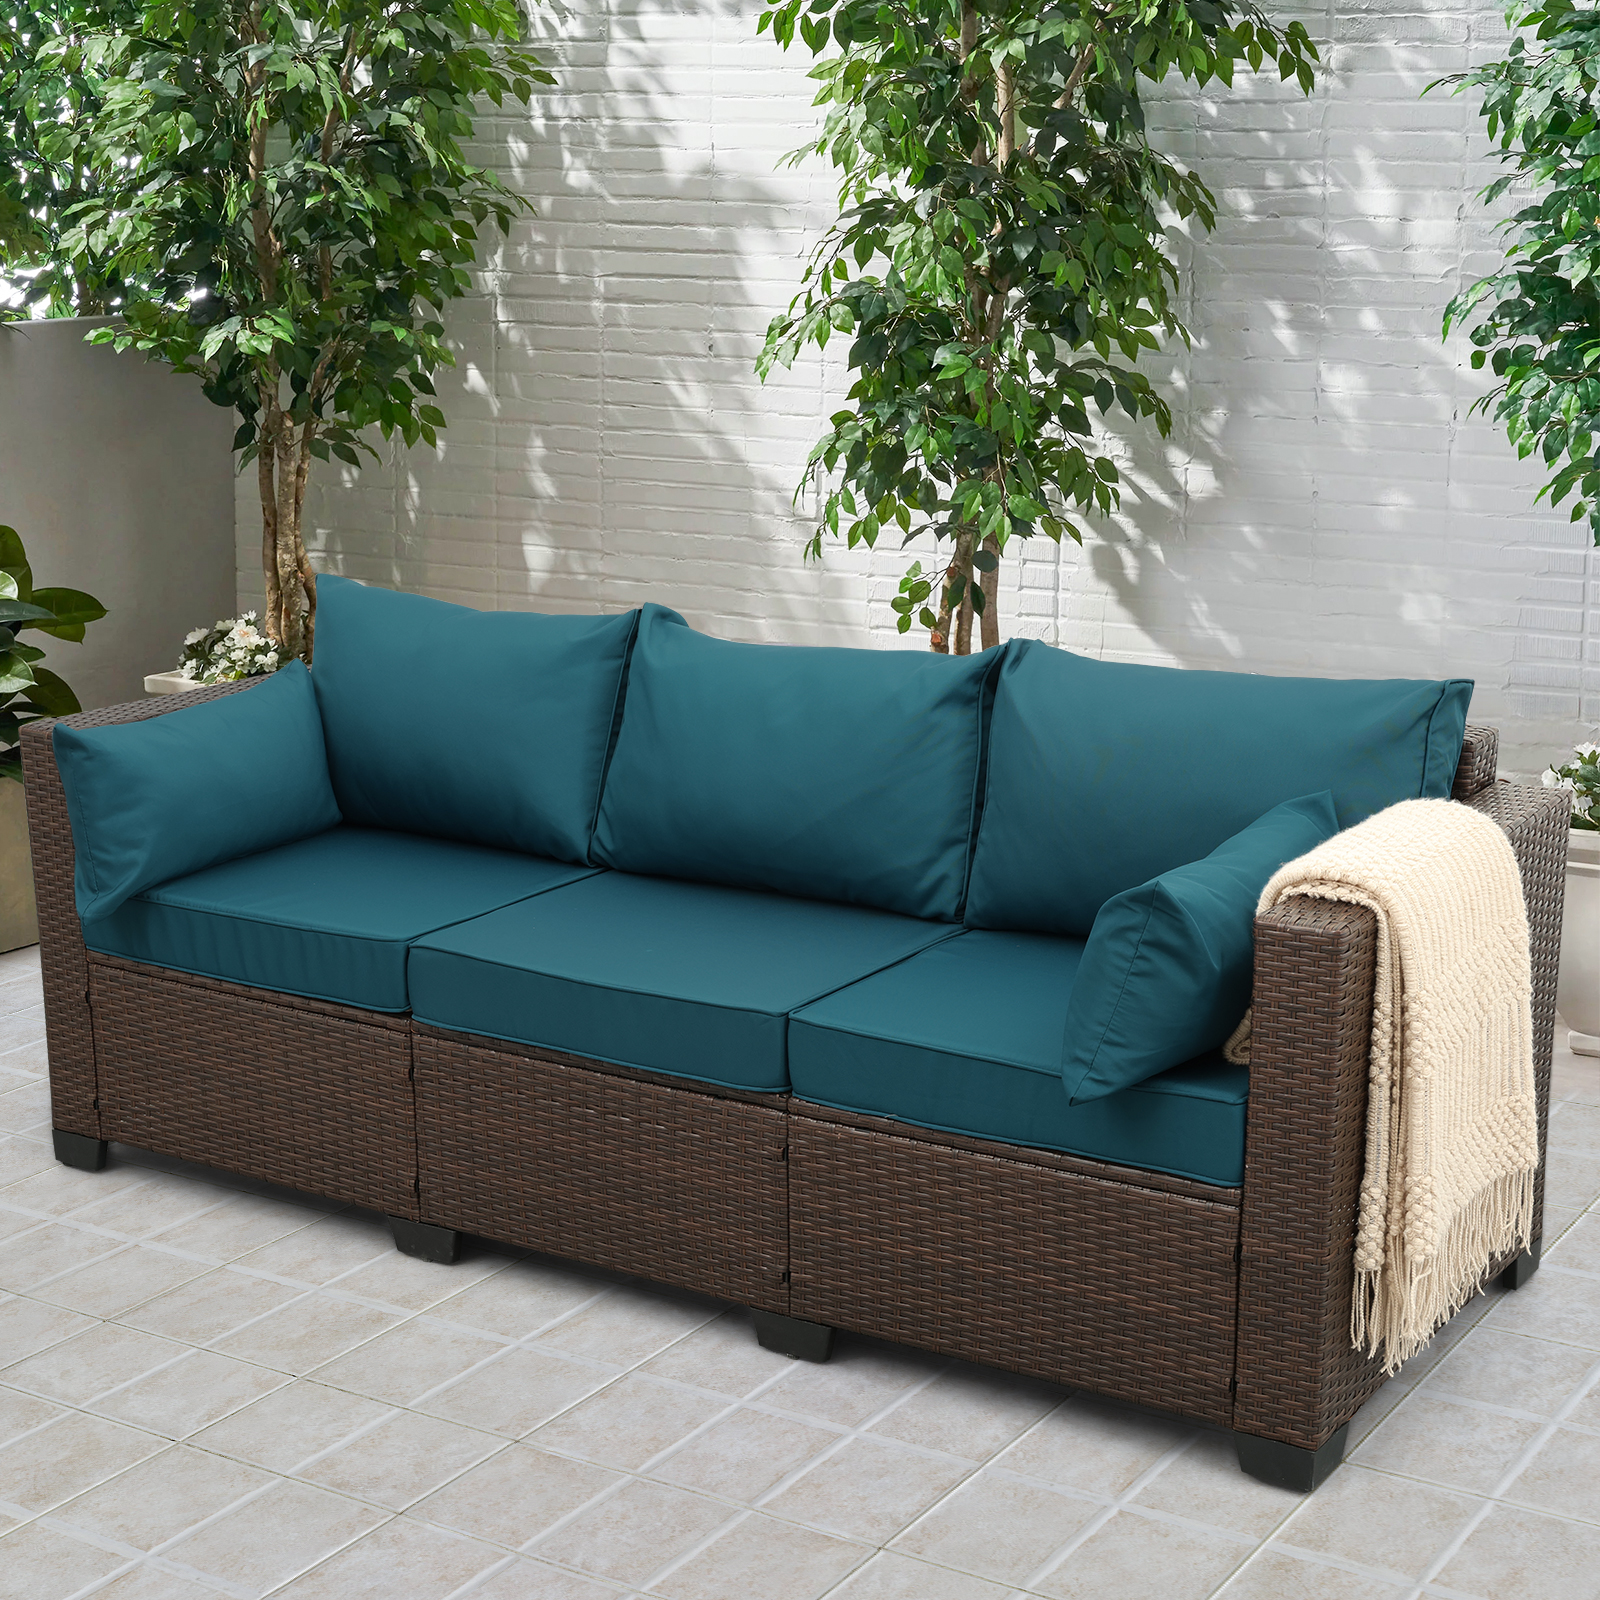 Waroom Patio 3-Seat Wicker Couch Outdoor Rattan Sofa Furniture, Peacock Blue Cushions - image 2 of 6